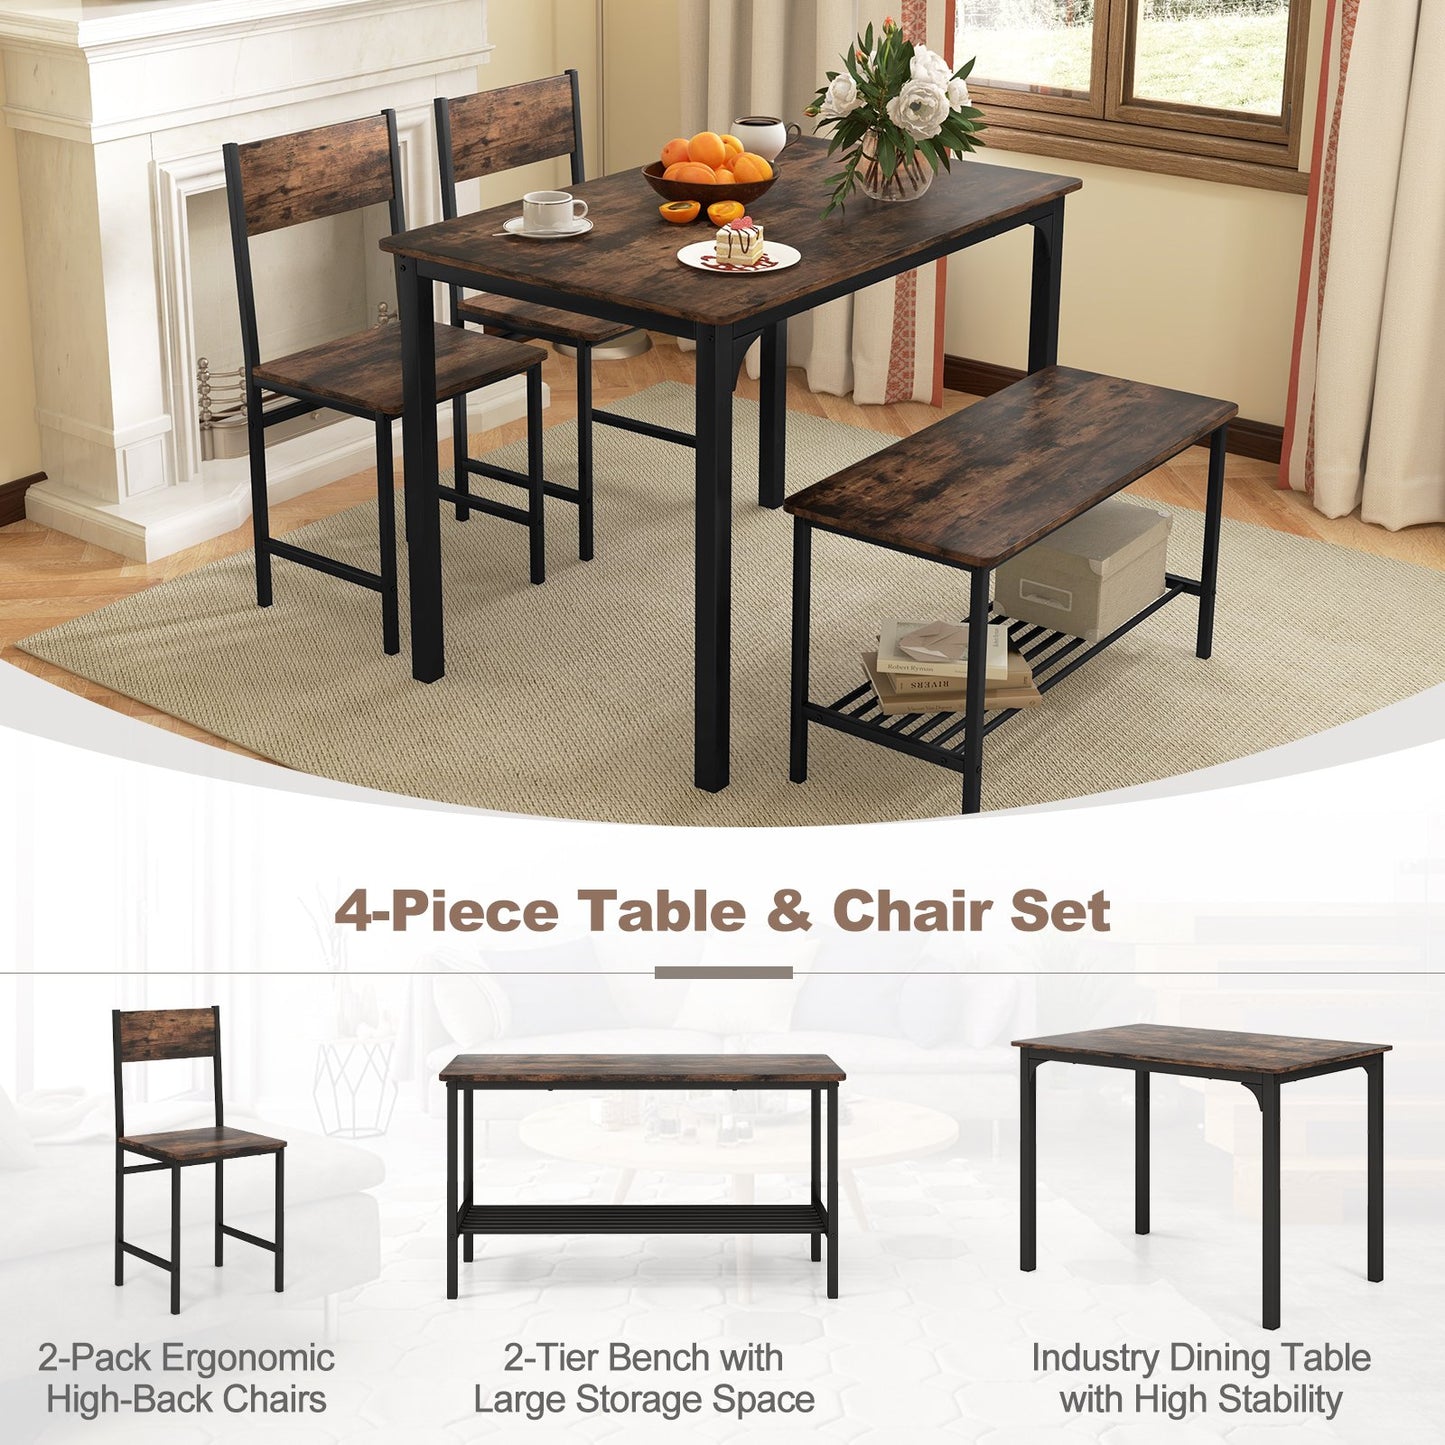 4 Pieces Rustic Dining Table Set with 2 Chairs and Bench, Rustic Brown